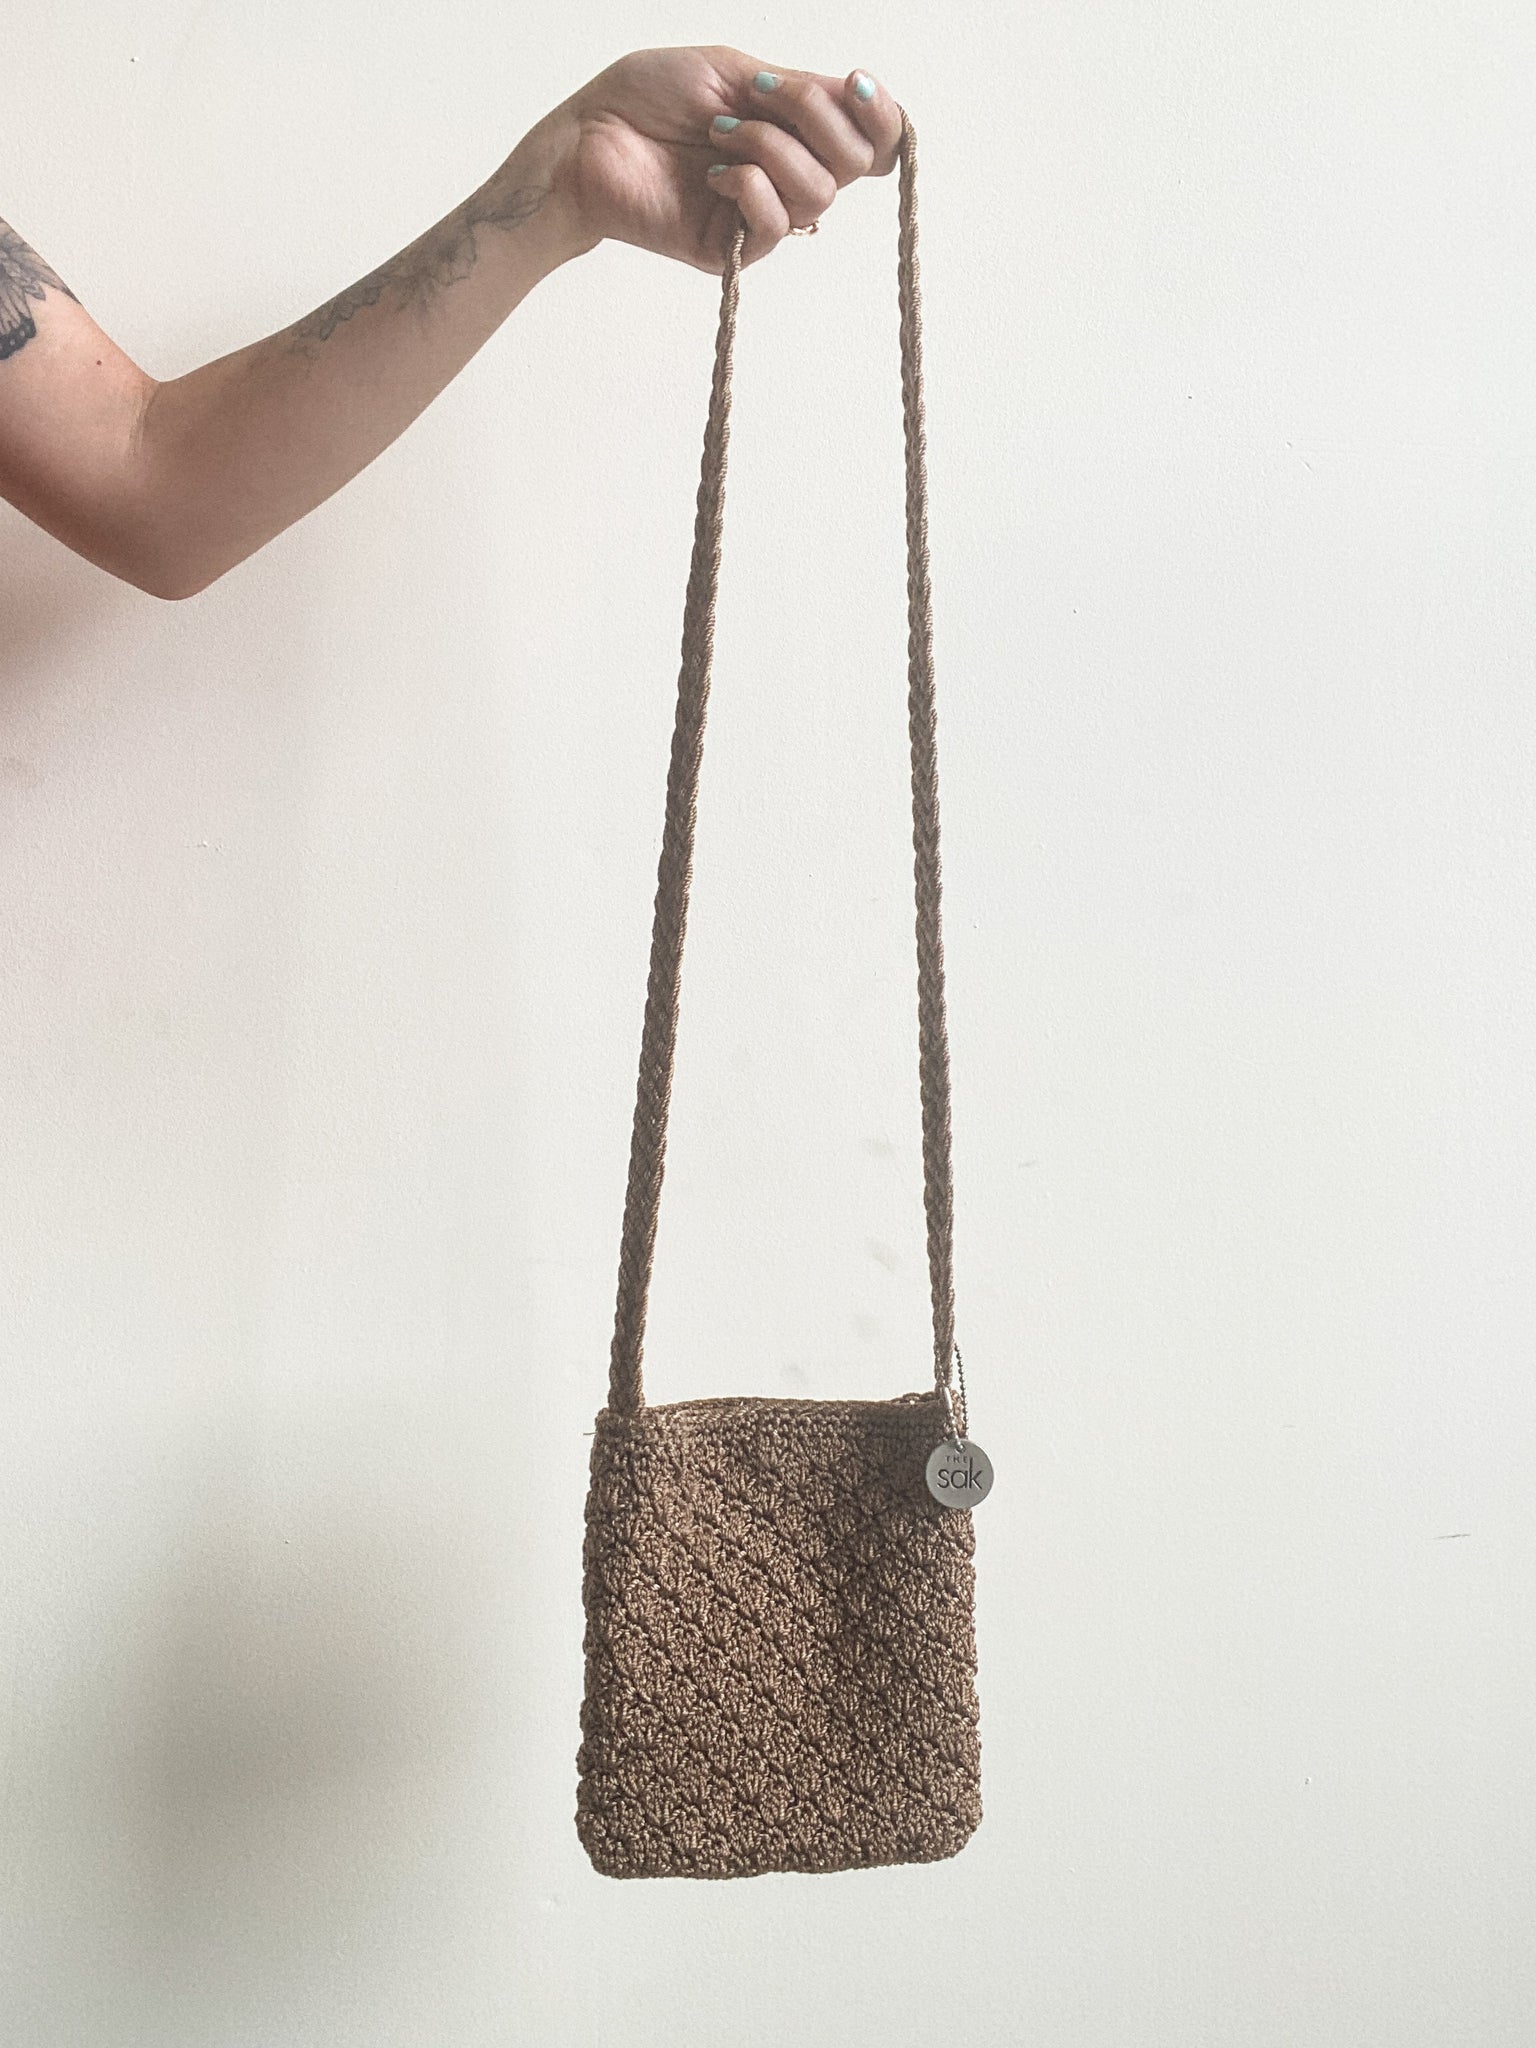 Small Crocheted Bag by The Sak